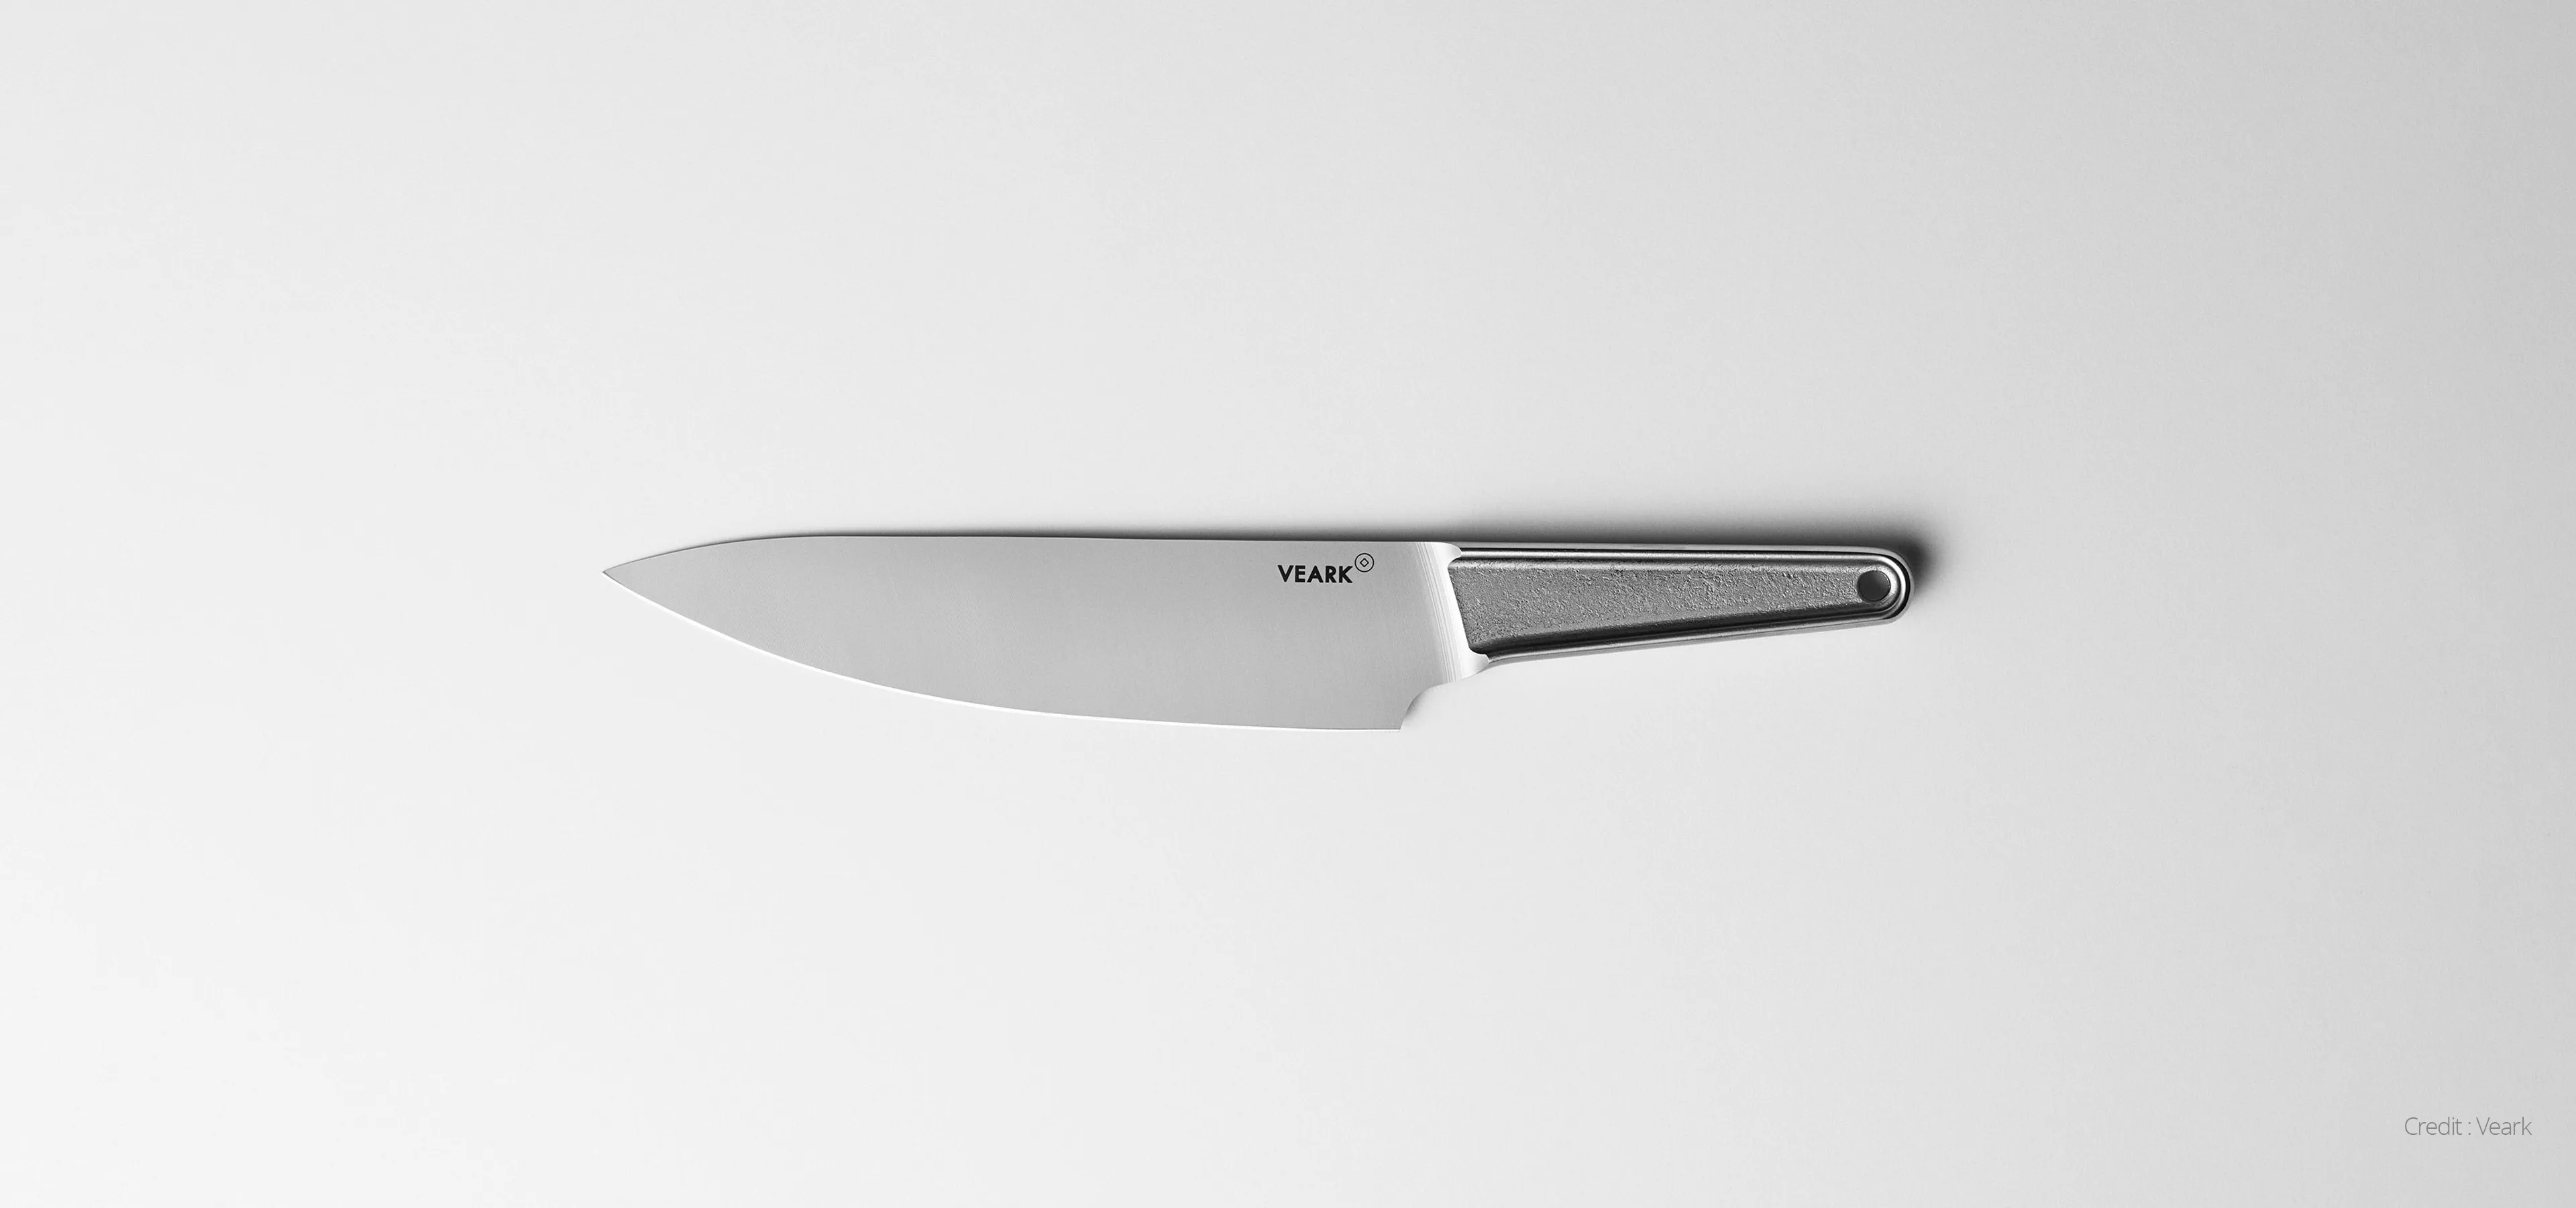 Veark forged knife on a grey background